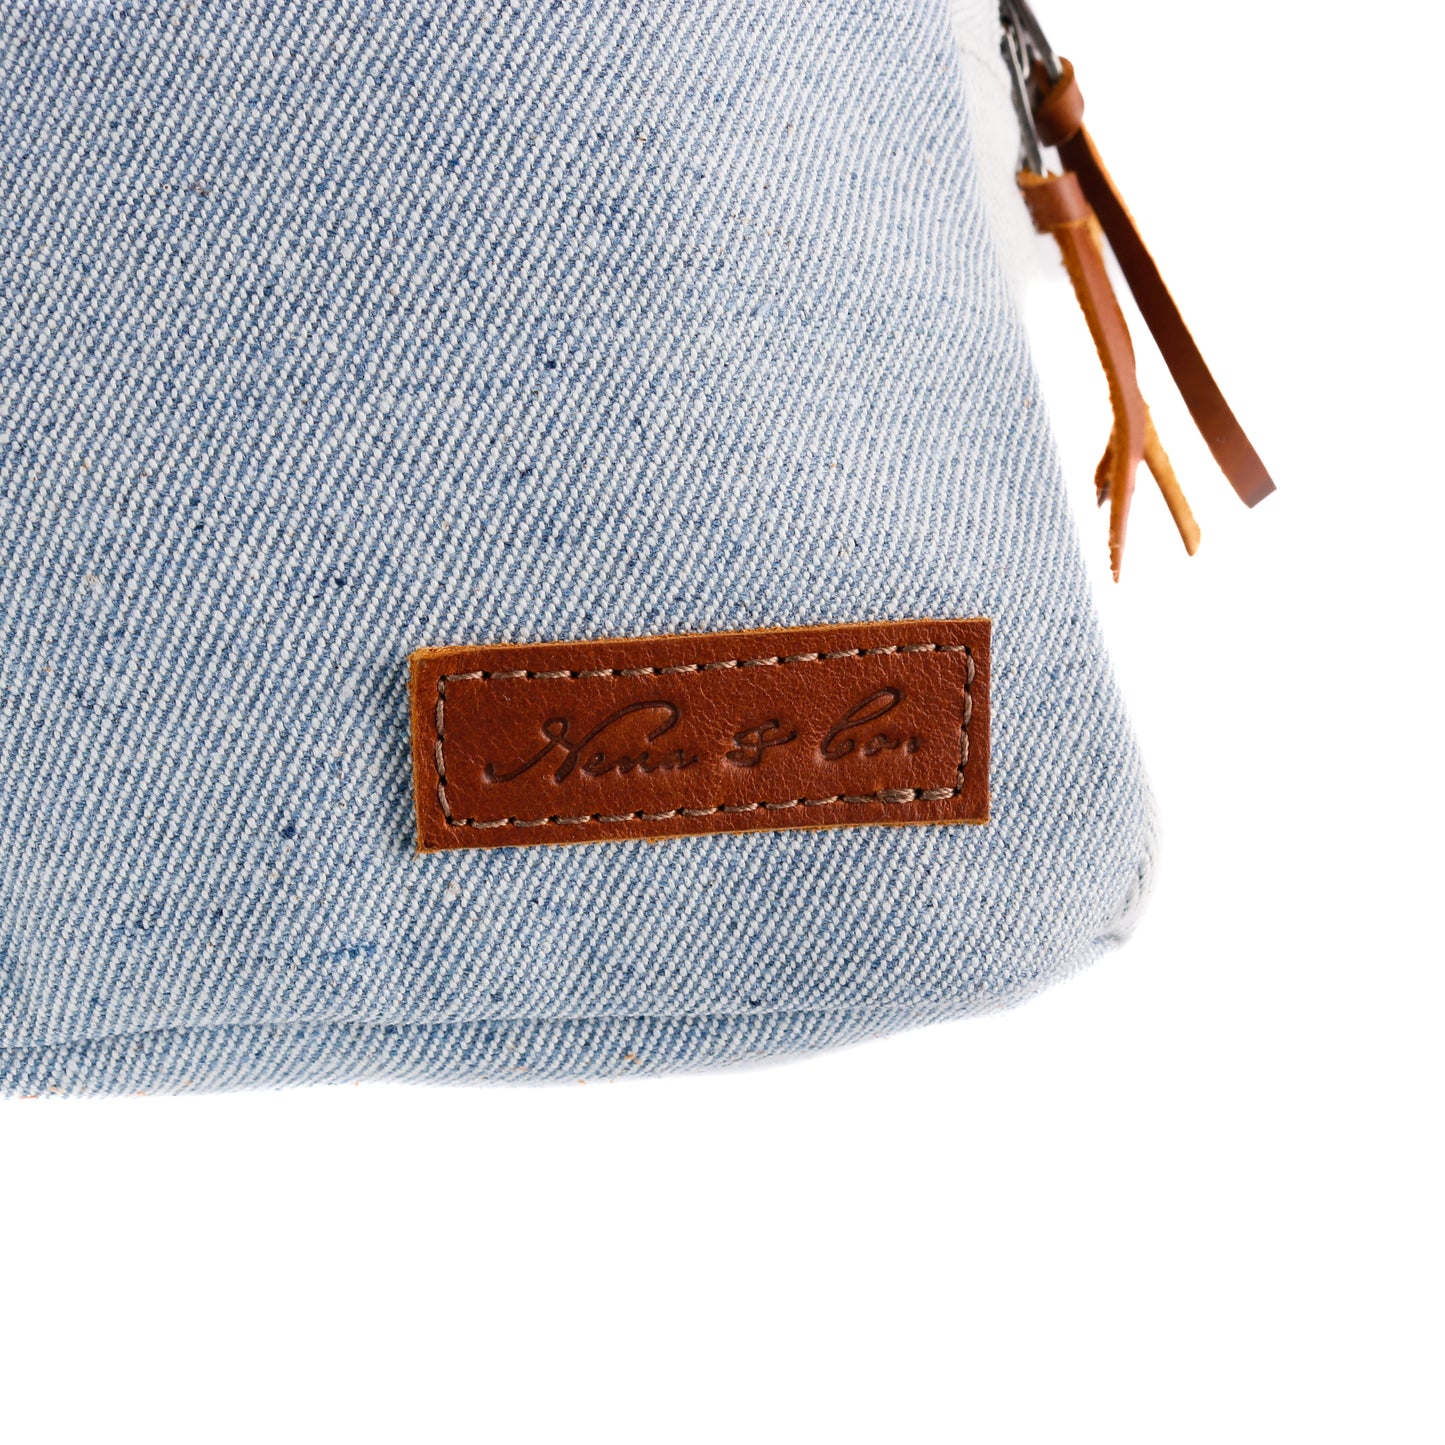 CROSSBODY SLING 2.0 - UPCYCLED DENIM WITH PATCH - CAFE - NO. 11339